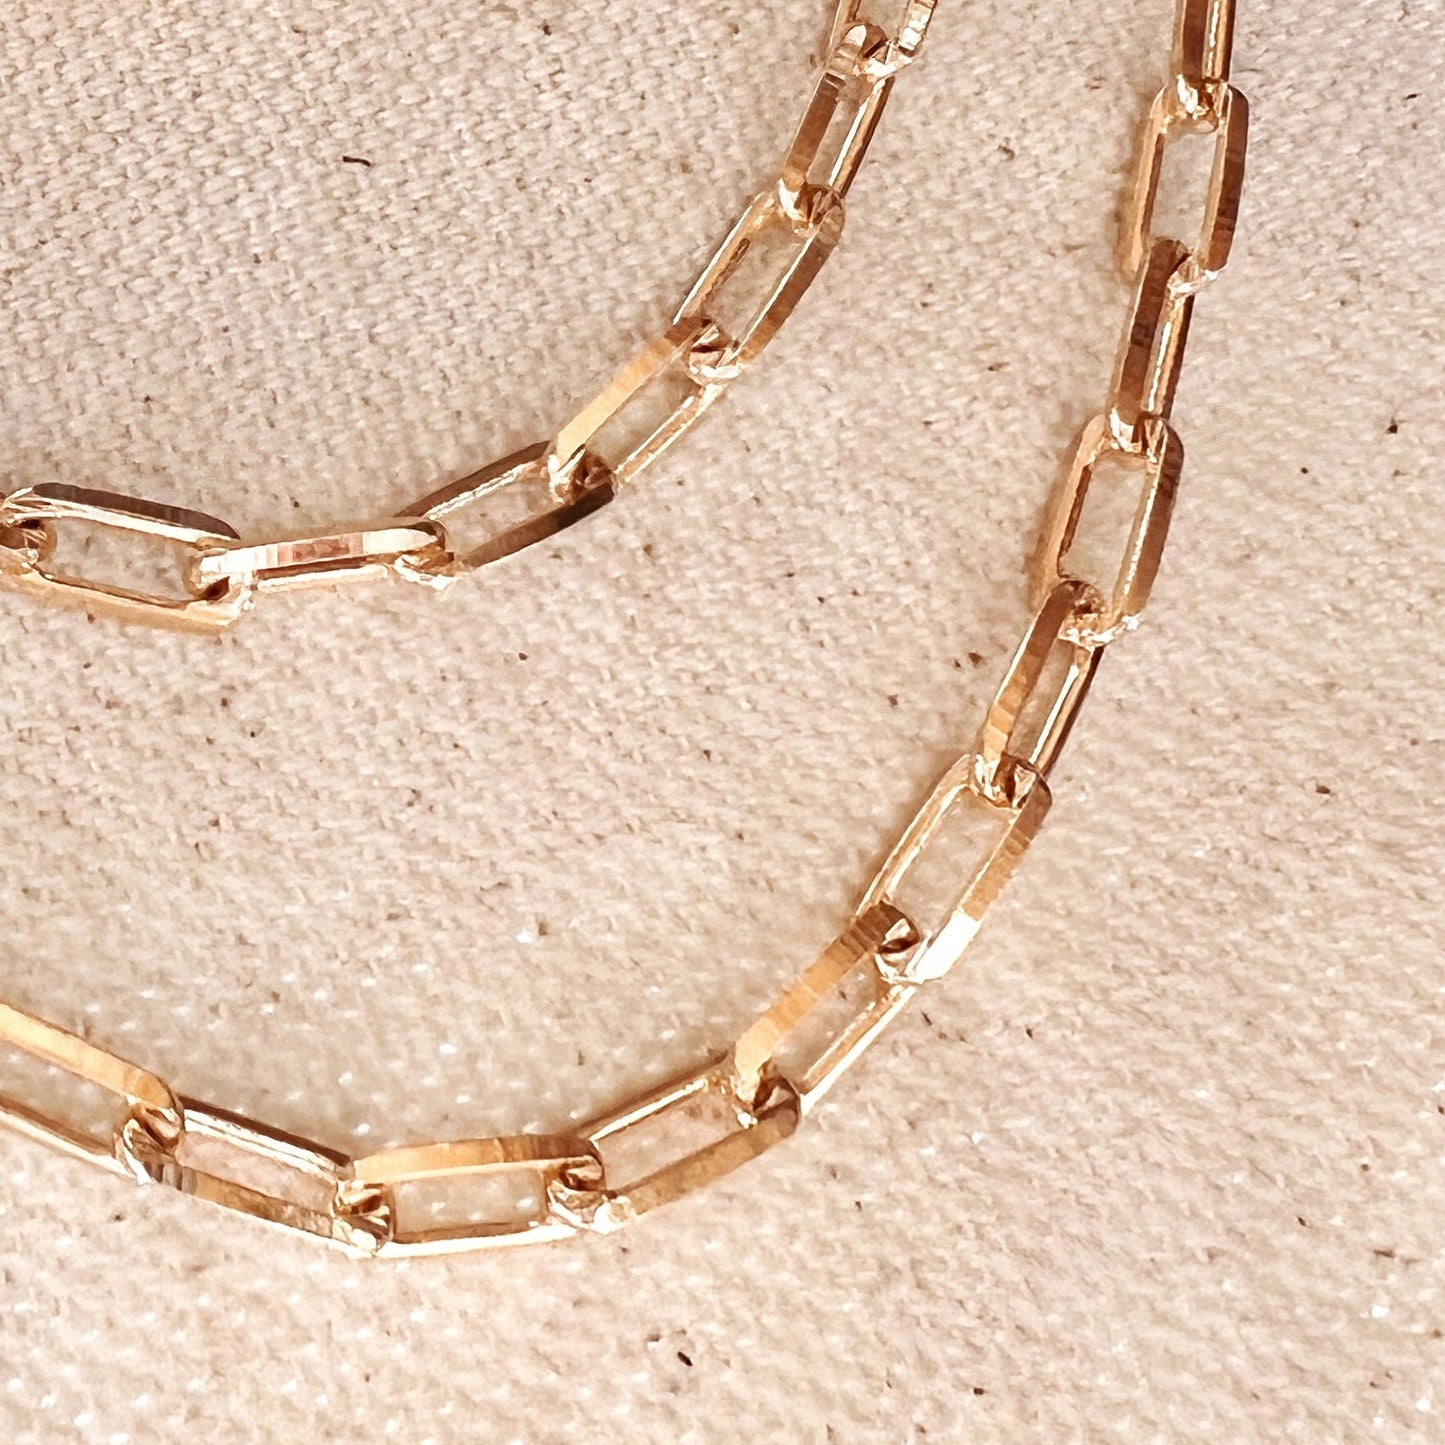 Gold Paperclip Chain Necklace - 18 Inches